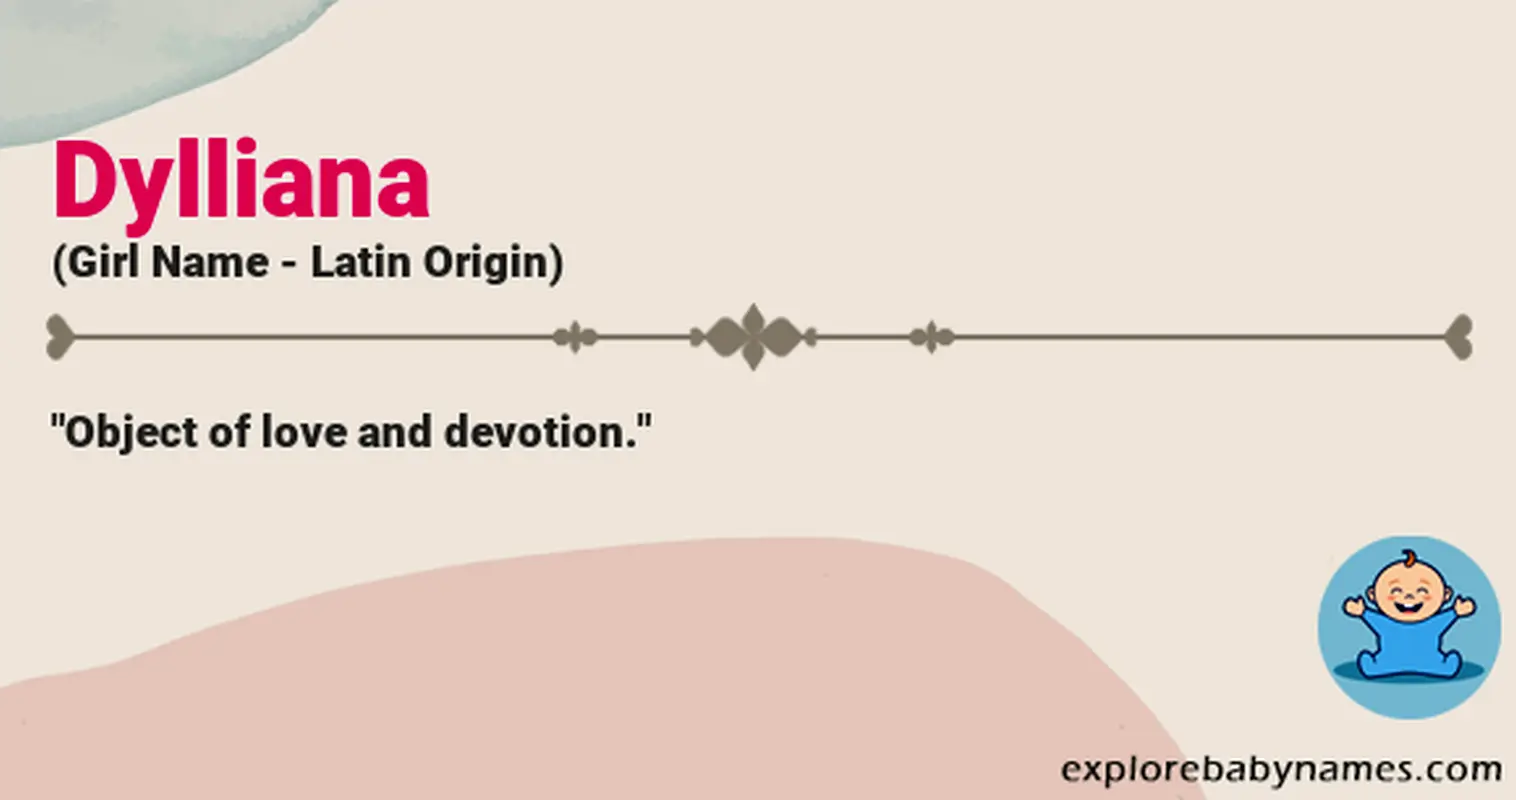 Meaning of Dylliana